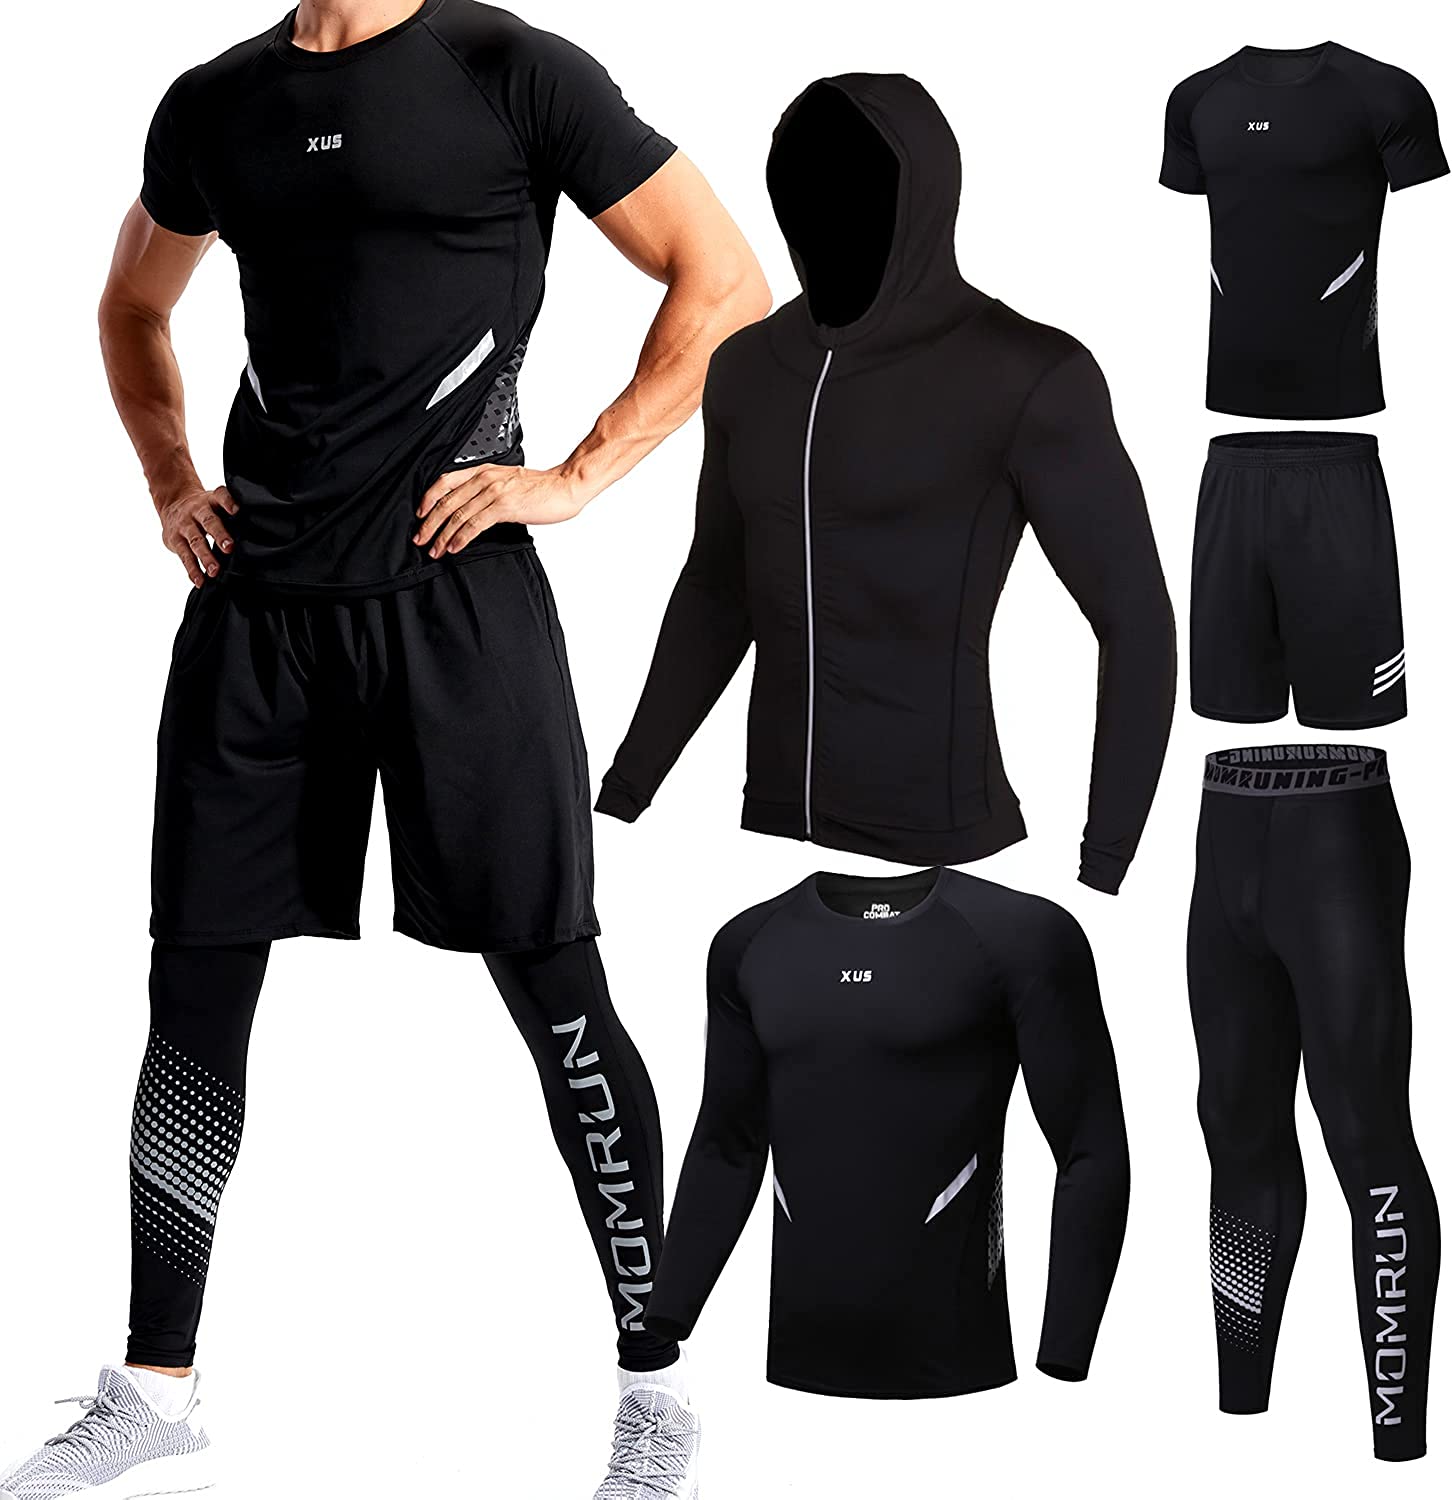 Indispensables, Gym & Fitness Clothing